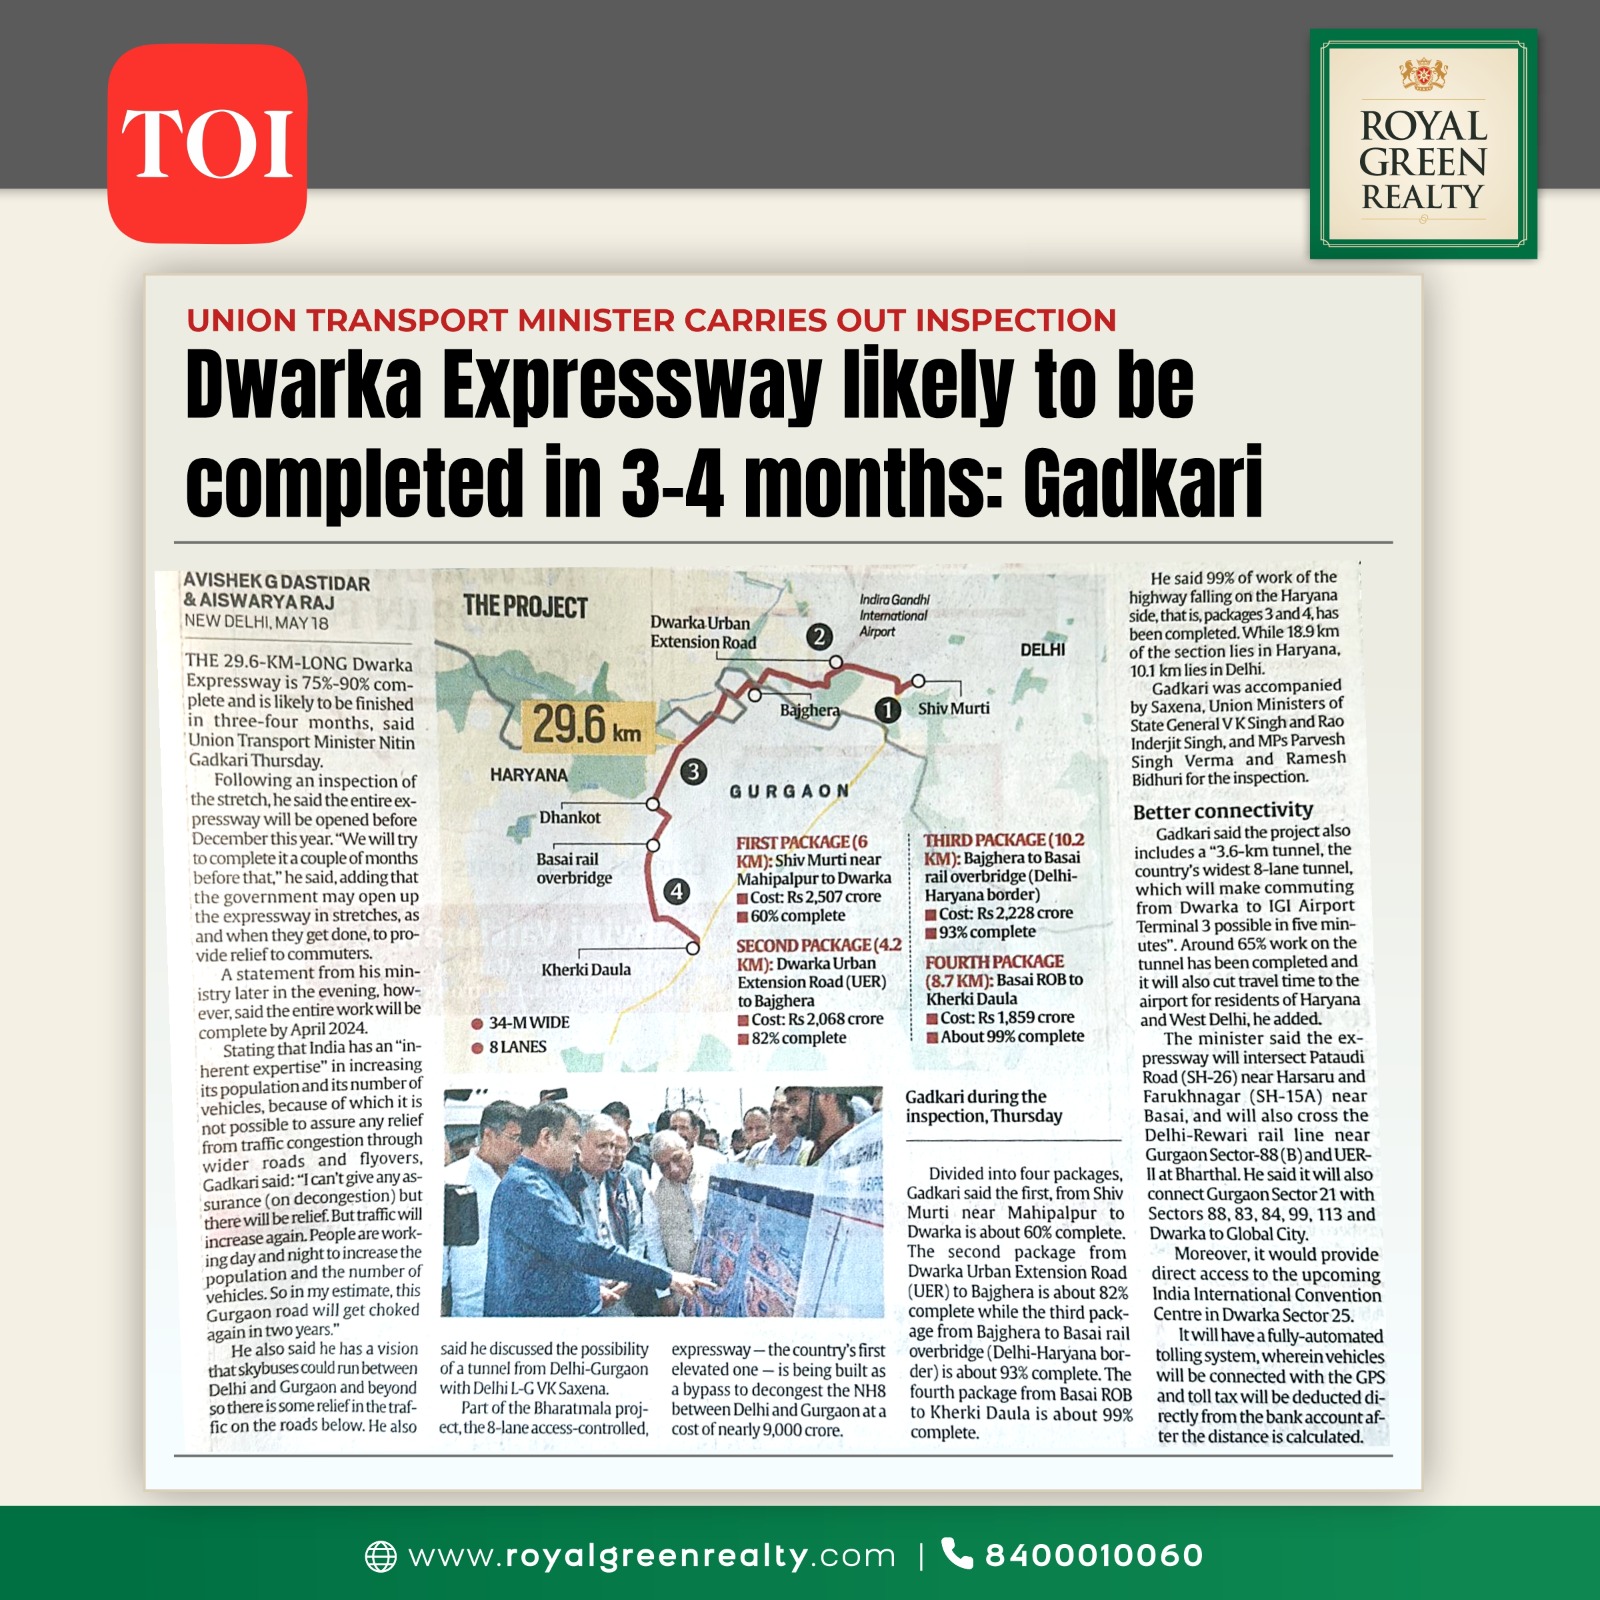 Dwarka Expressway likely to be comepleted in 3-4 months: Gadkari